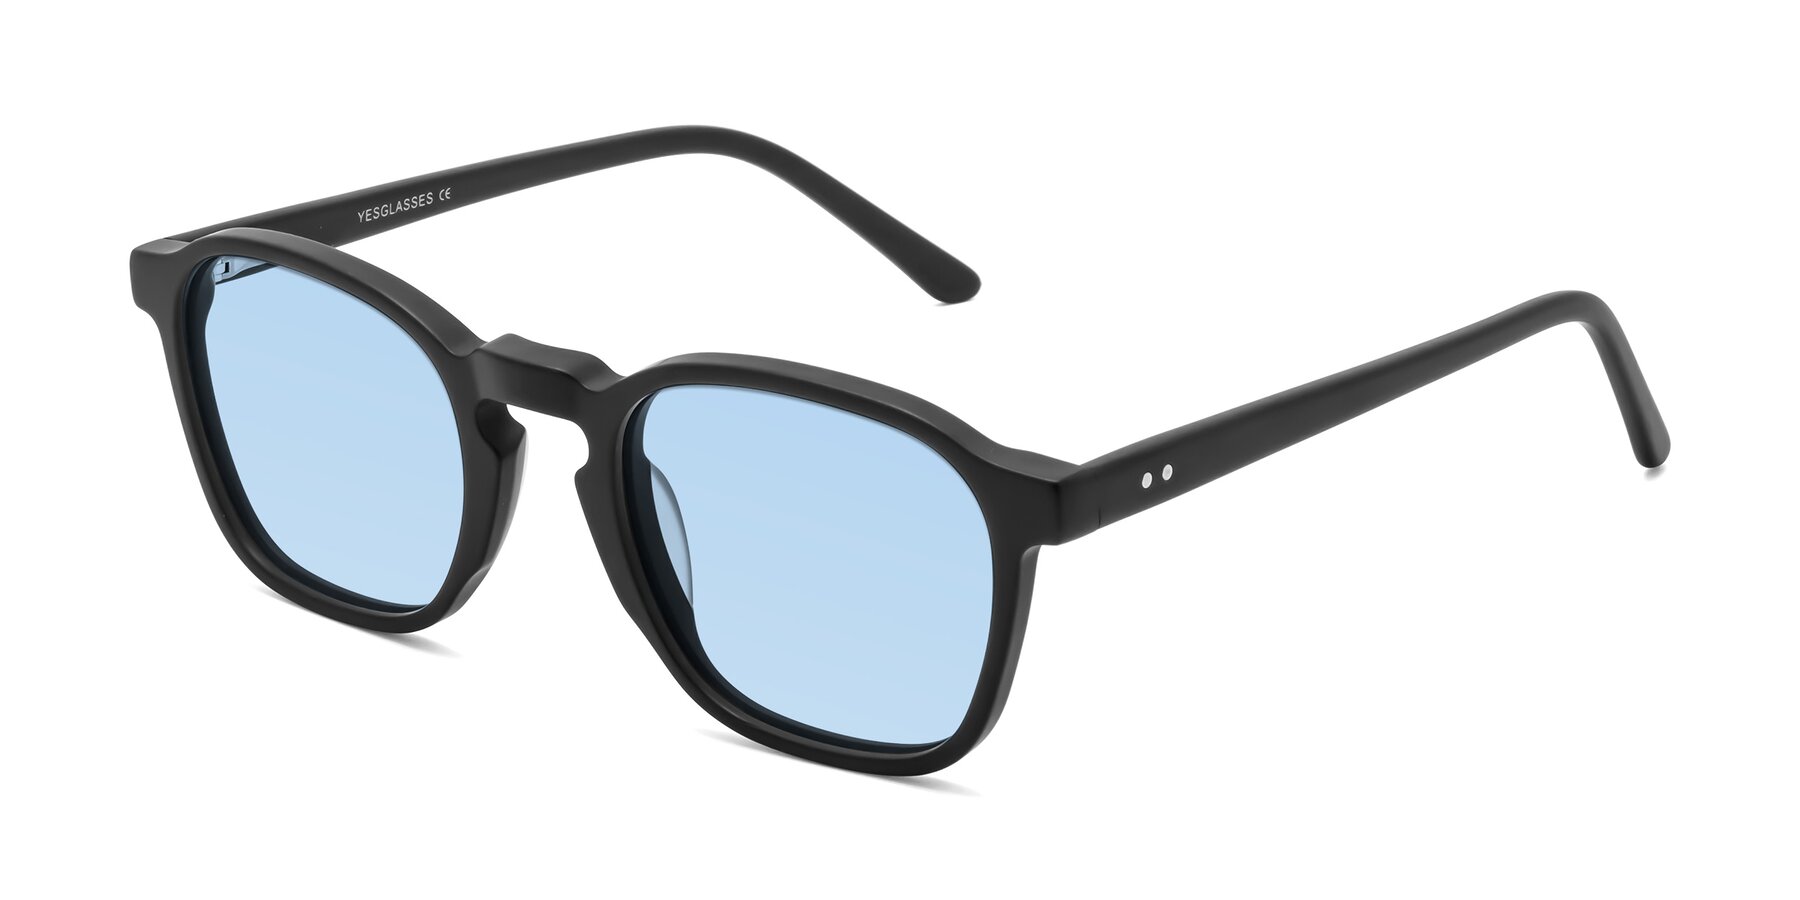 Angle of Generous in Matte Black with Light Blue Tinted Lenses